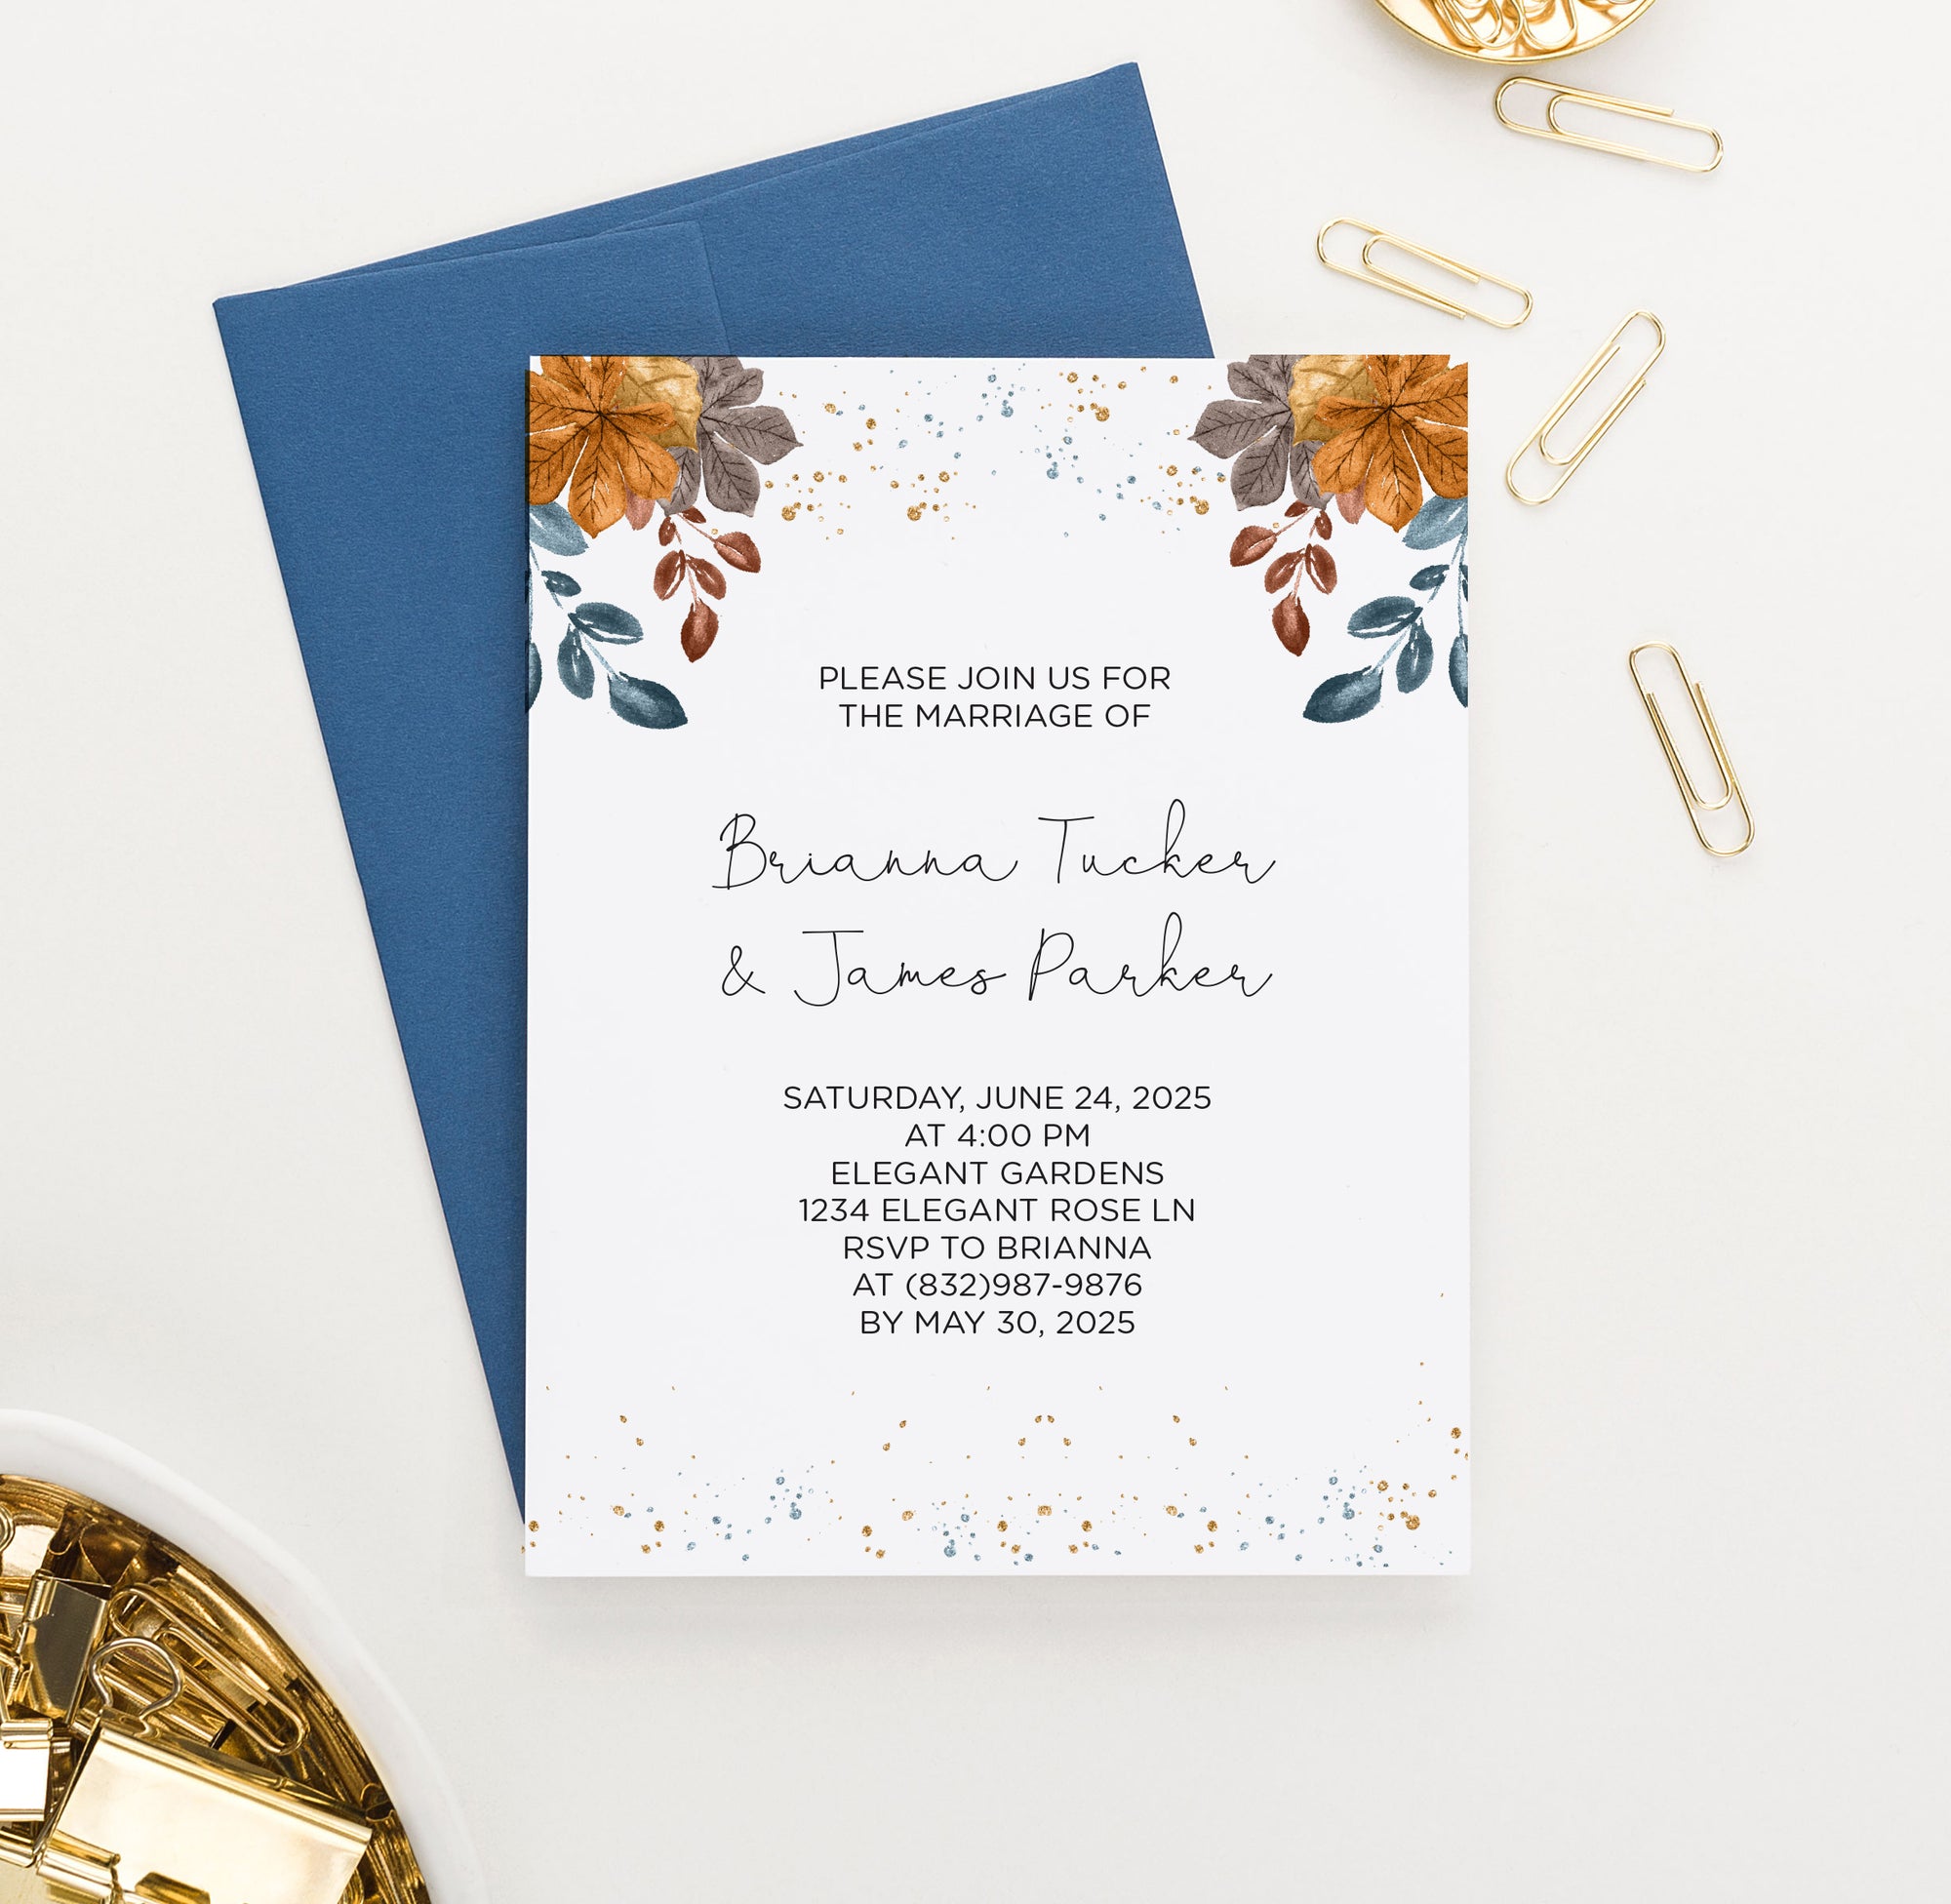    WI024 Classic Fall Wedding Invitations Personalized autumn elegant classy blue brown leaves invites marriage